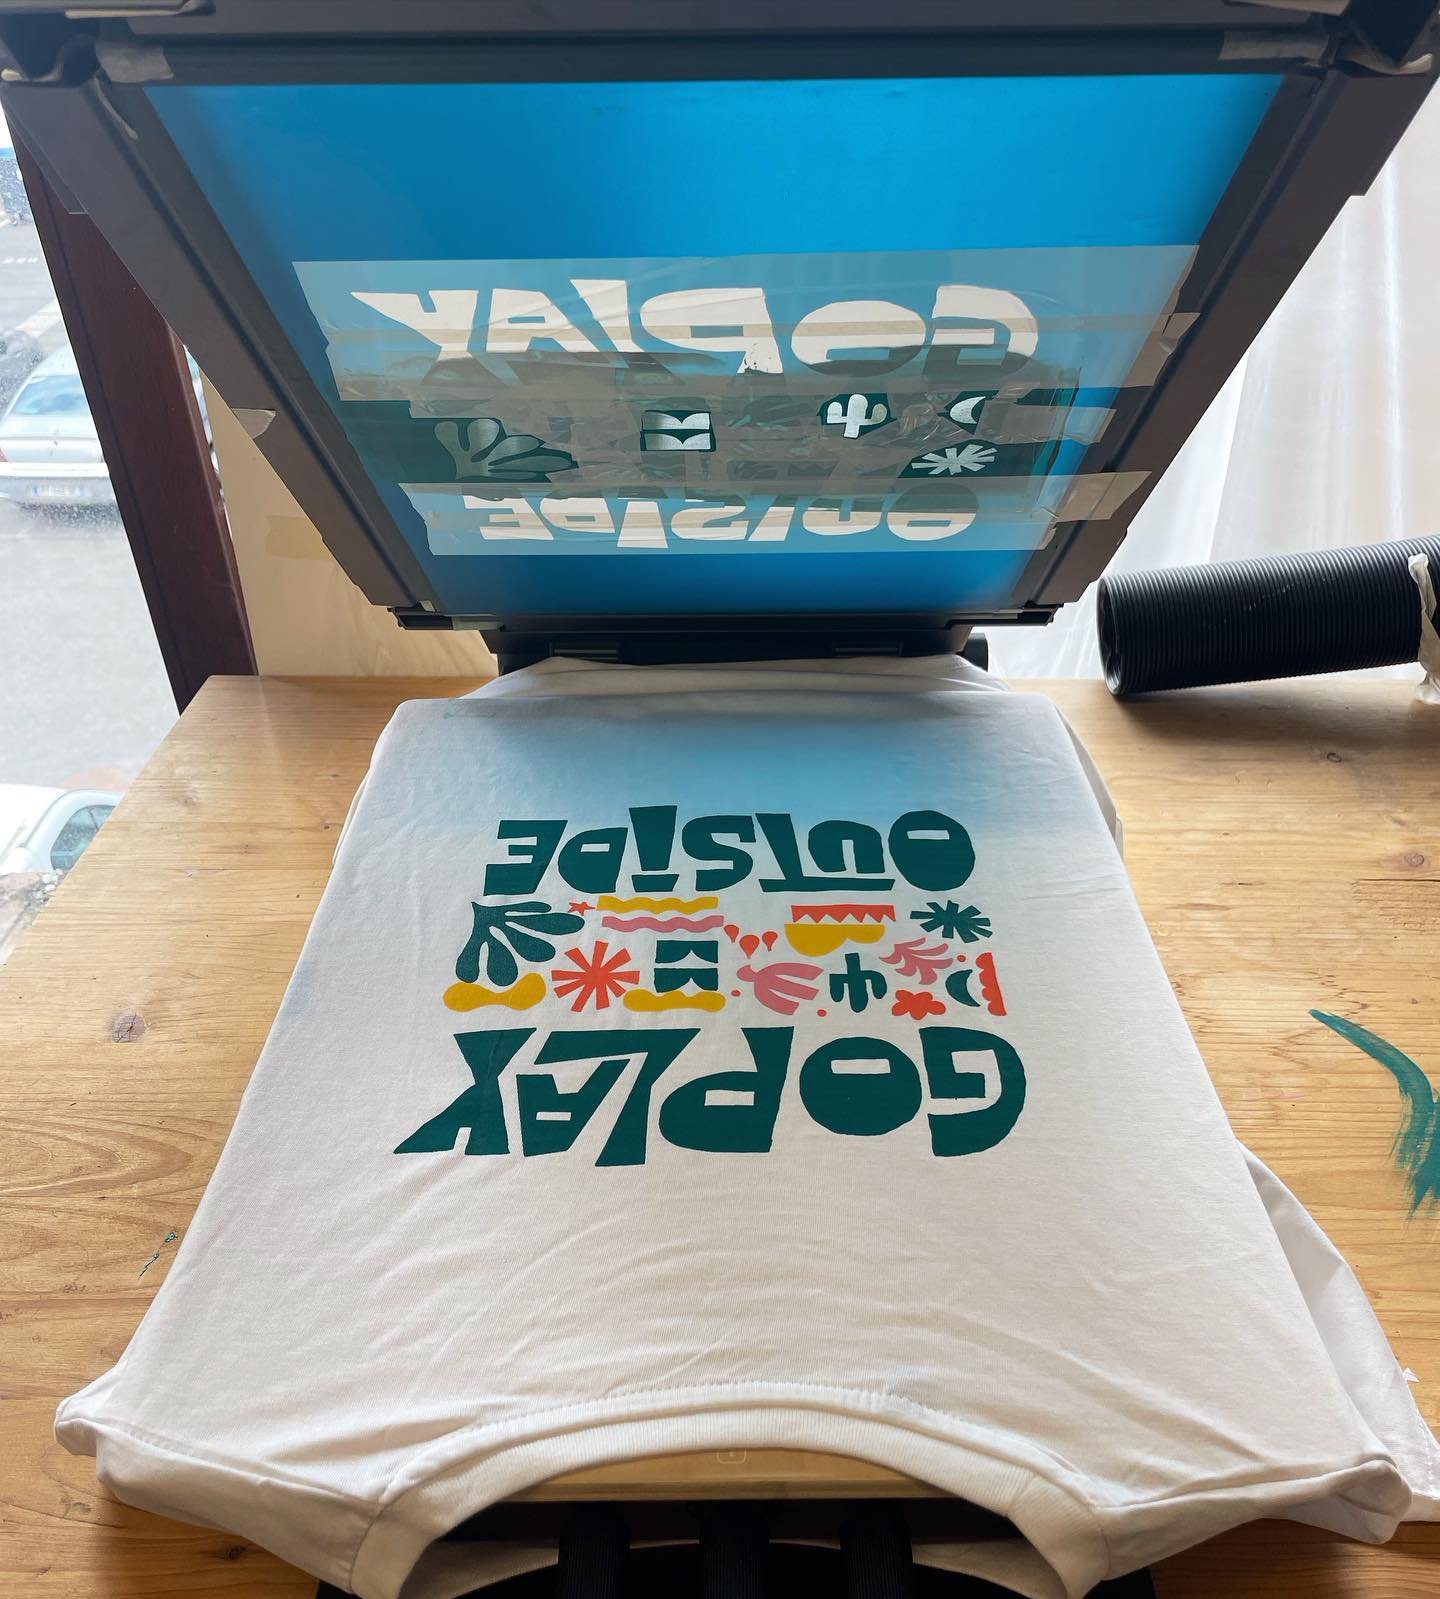 Working on an upcoming tshirt. Printing on fabrics is way more difficult than on paper to me. Designing small stuff in small sizes was maybe not the best idea 🤣😅 But I love the process. 

I am happy to use the @xtool.official screenprinting system 